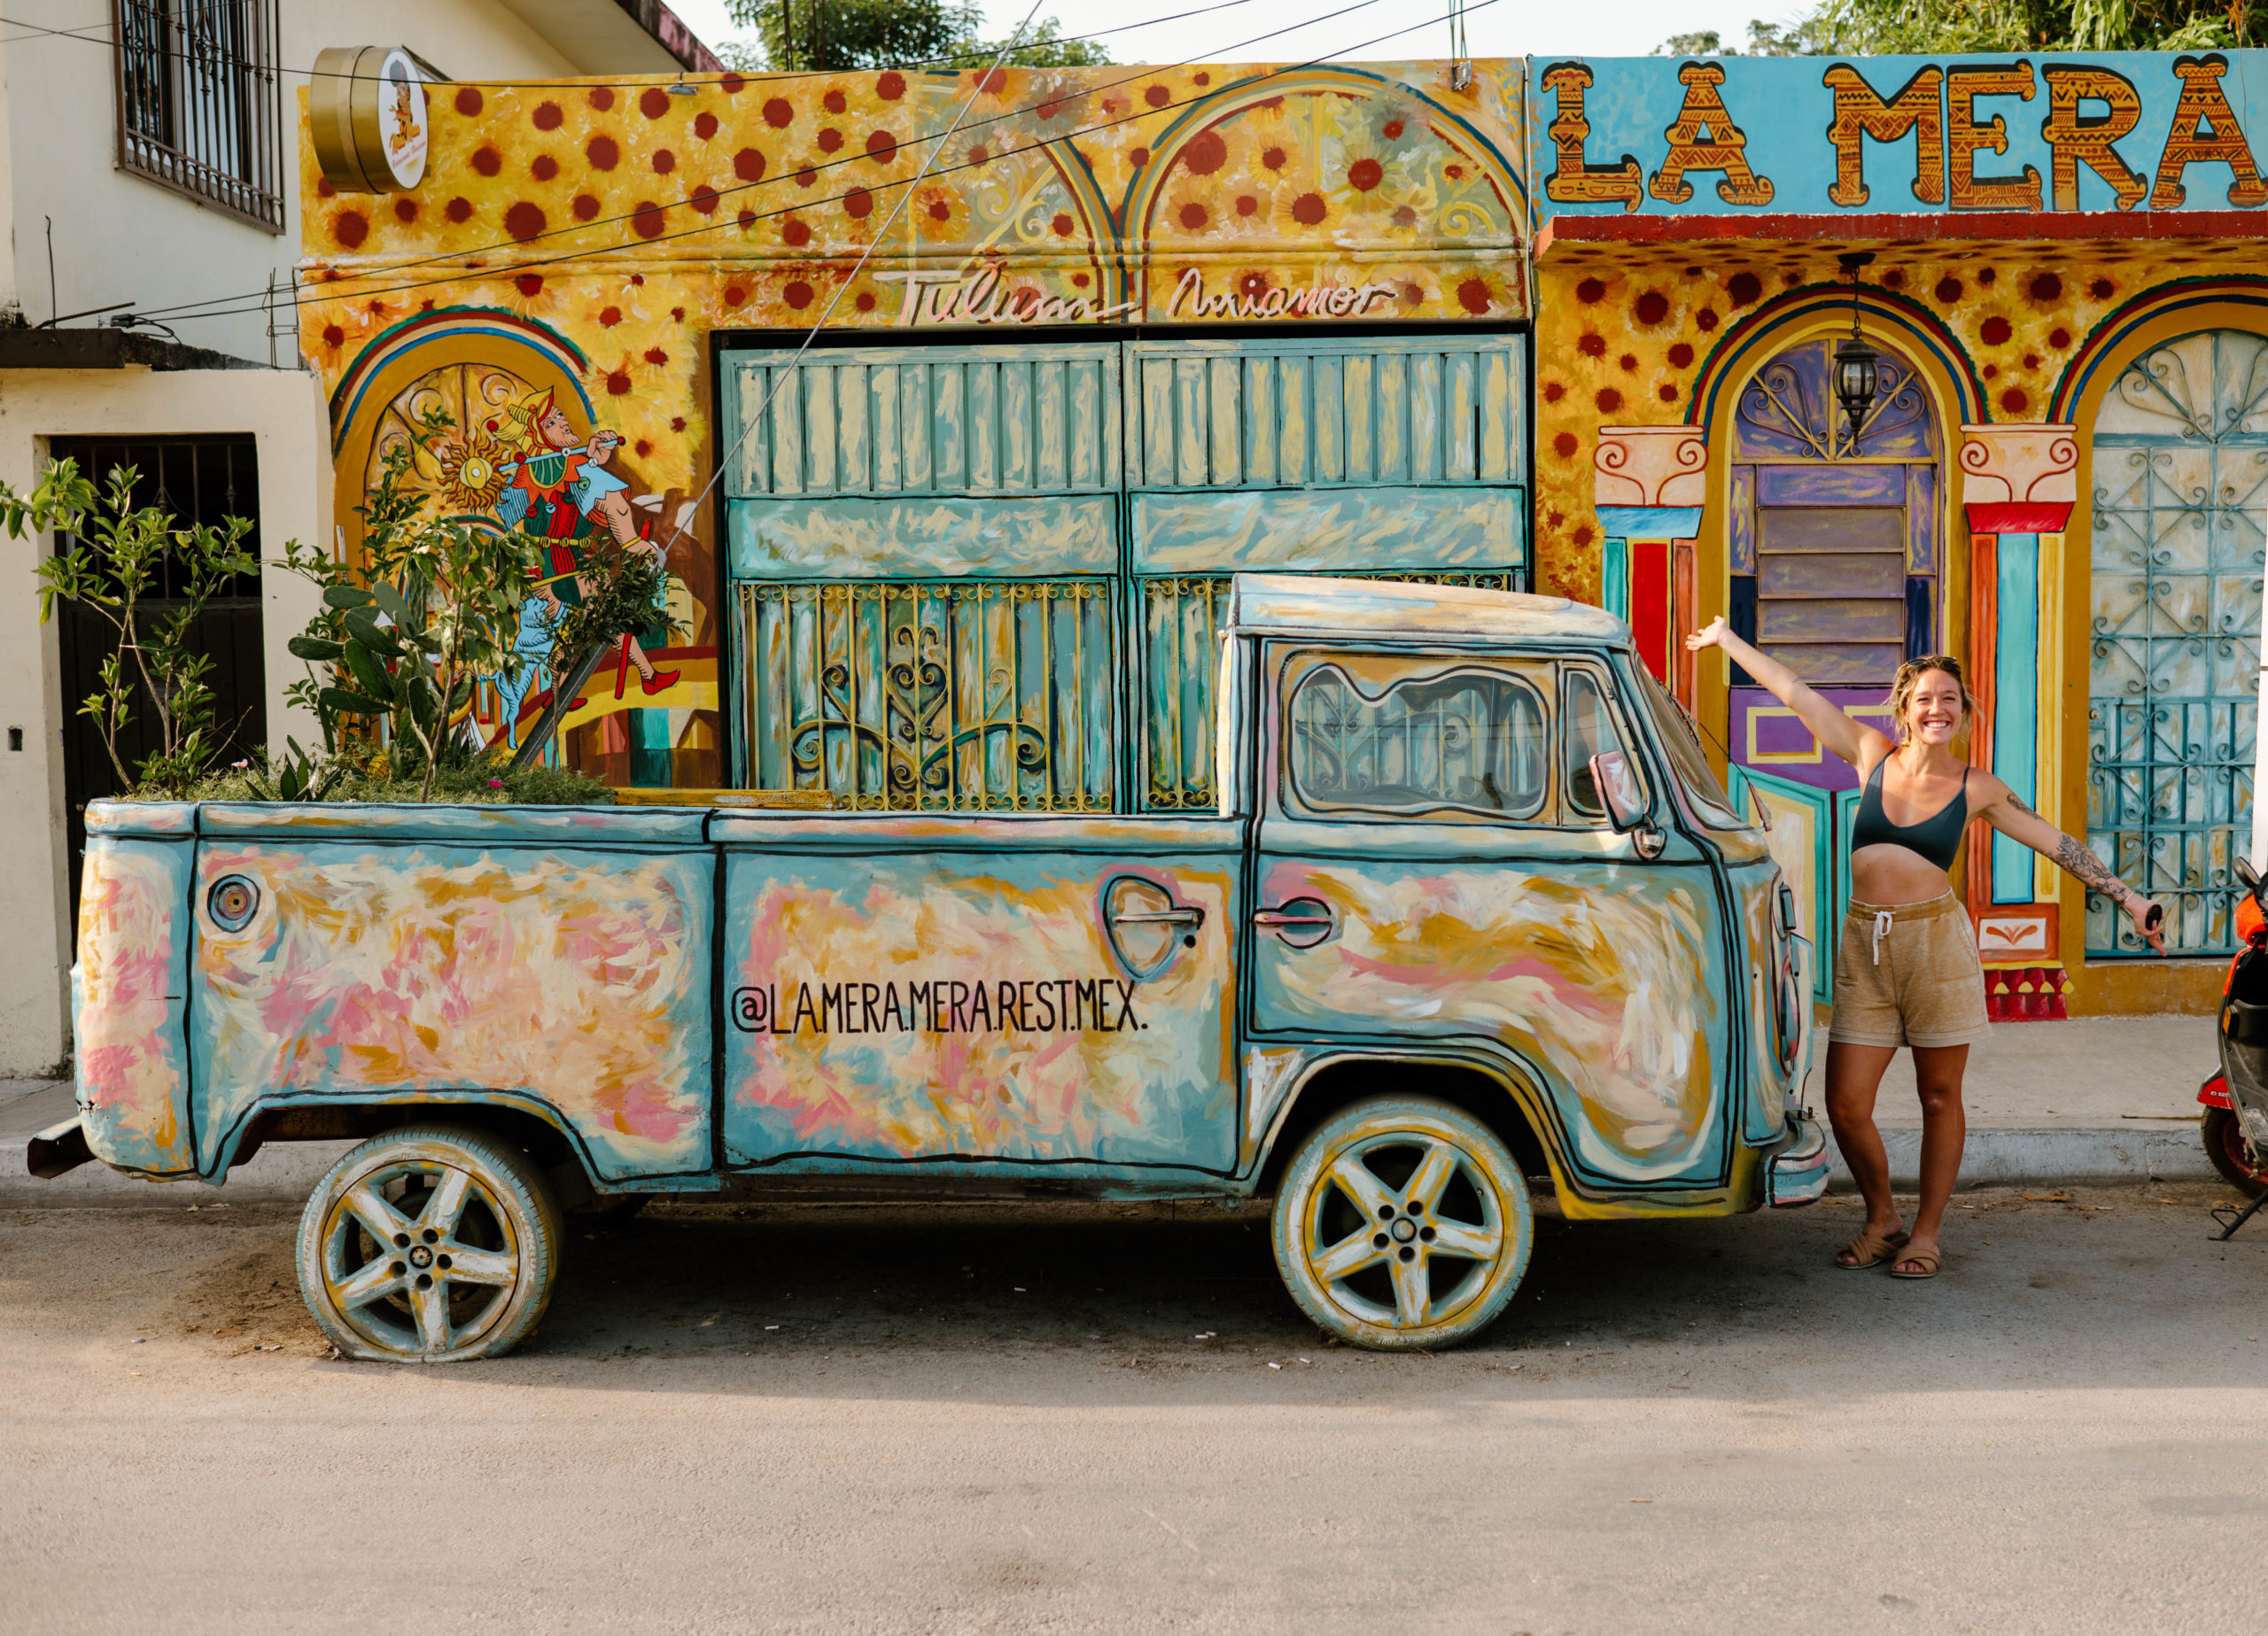 A rental car is the best way to get around Mexico, and is essential with your guide to eloping in Tulum.